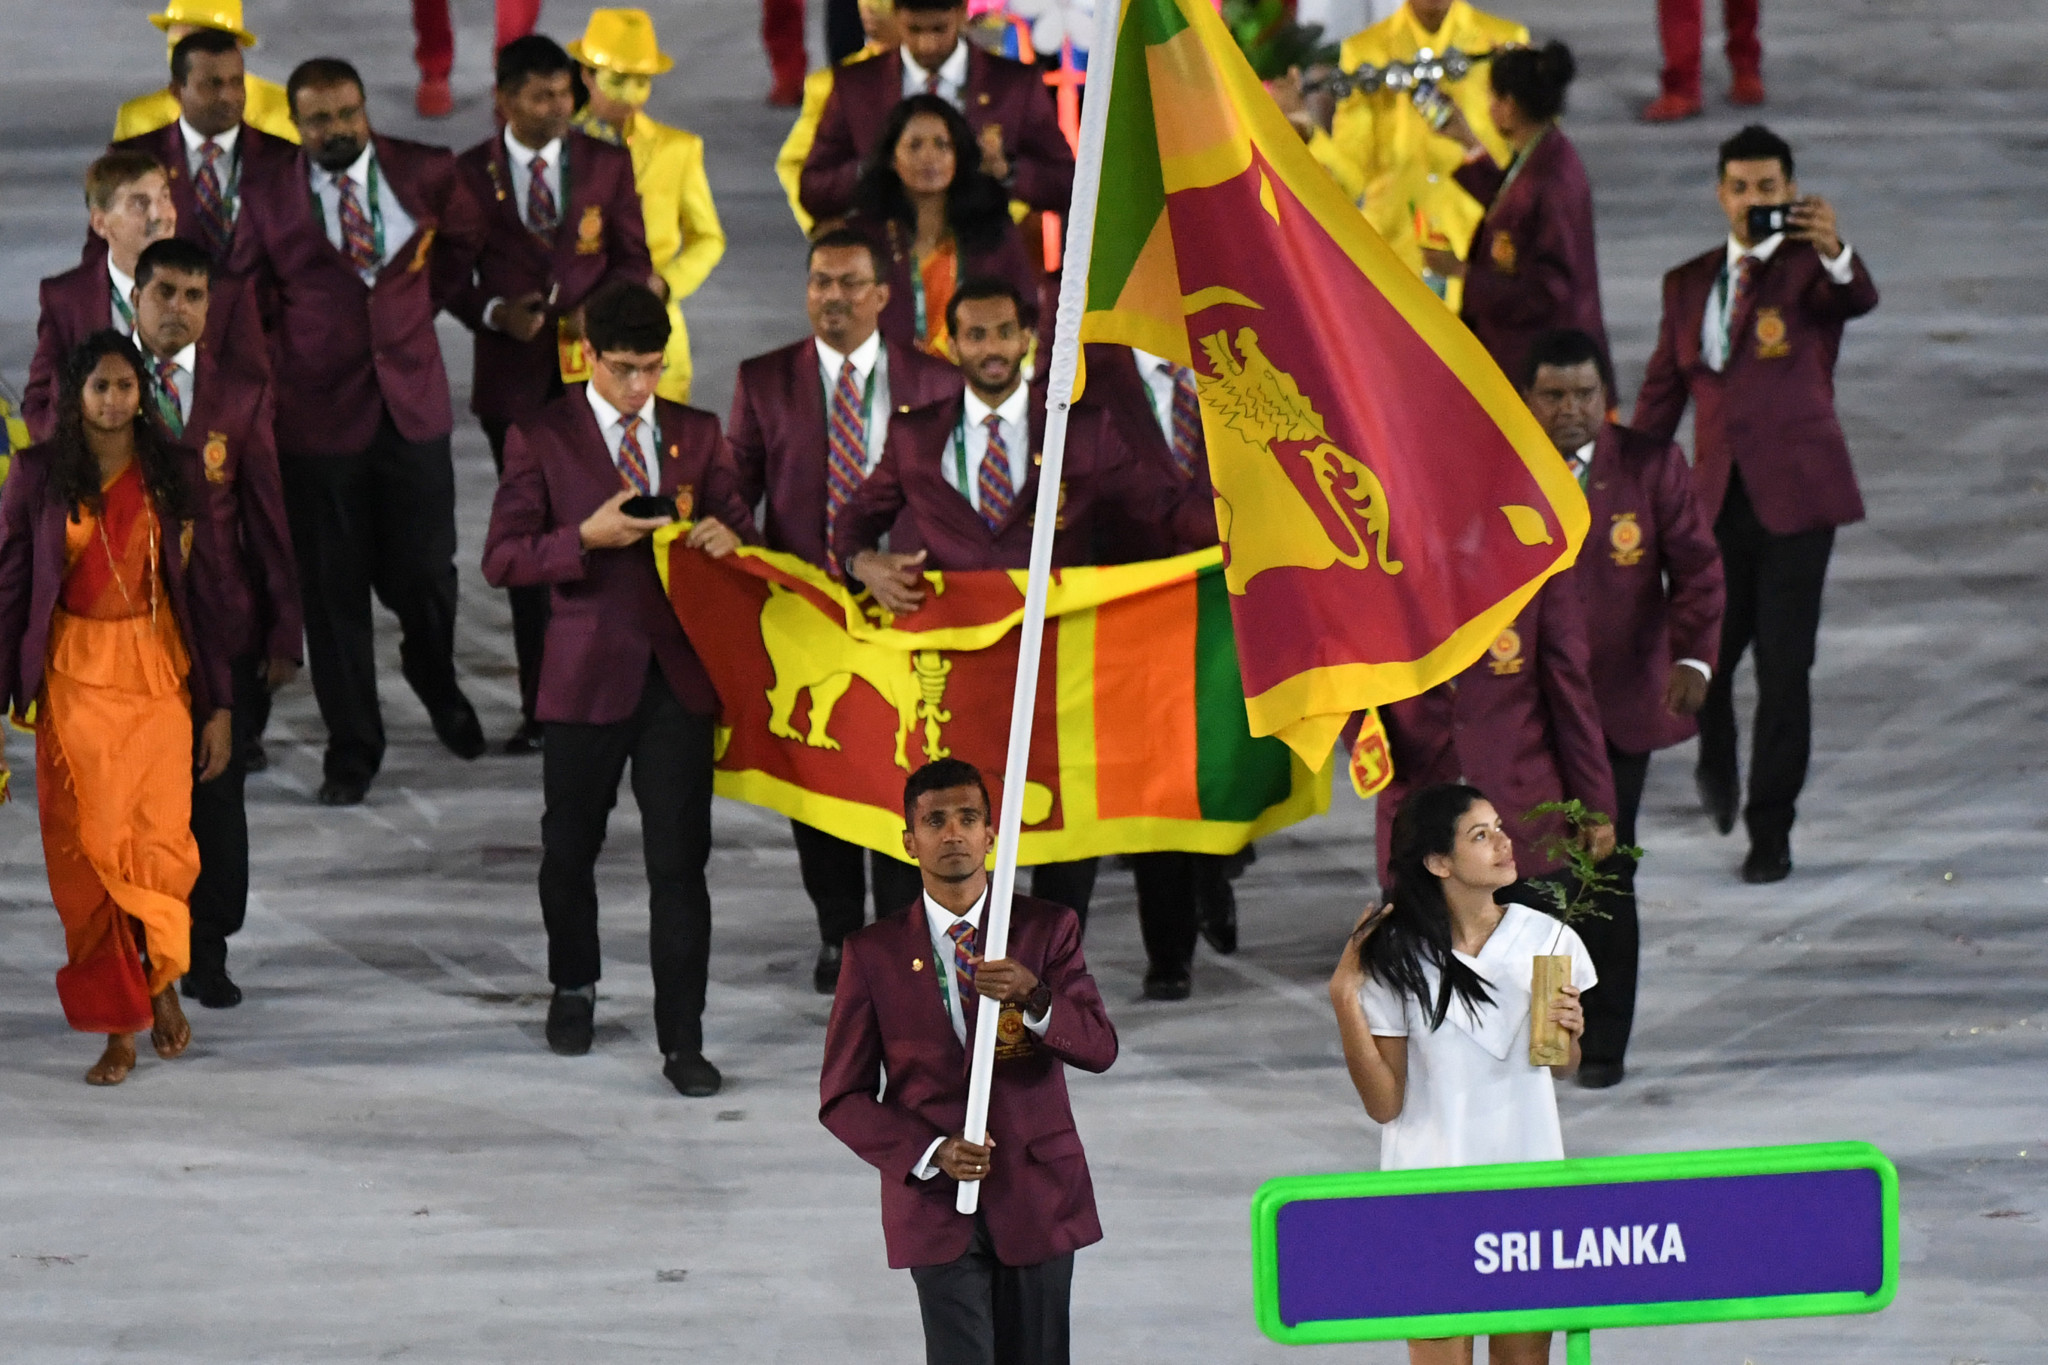 Sri Lanka NOC distributes ANOC funding to National Federations and athletes